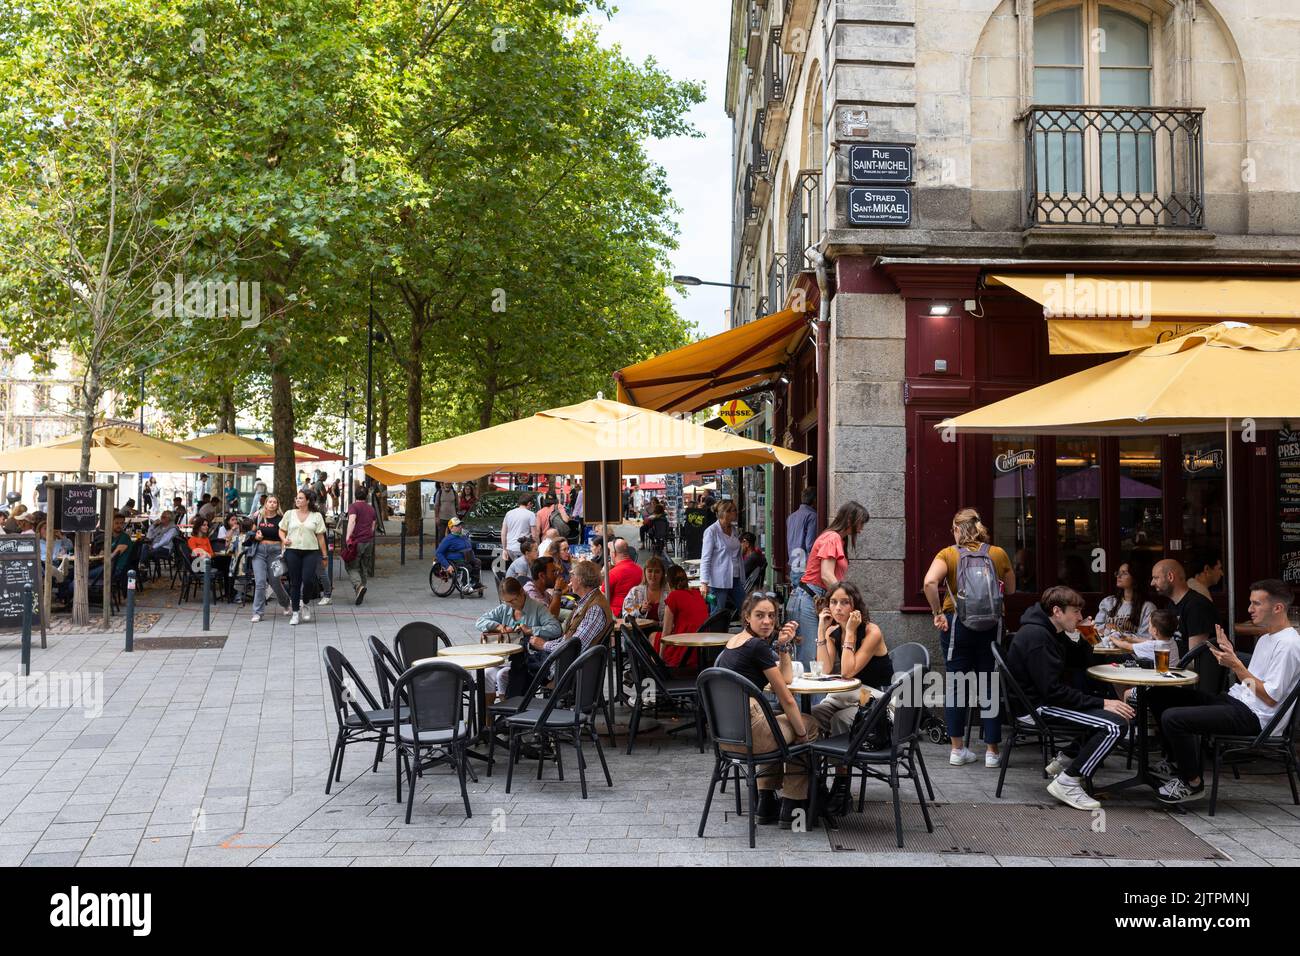 Two young women conversation at a terrace of a restaurant, Rennes, France Stock Photo